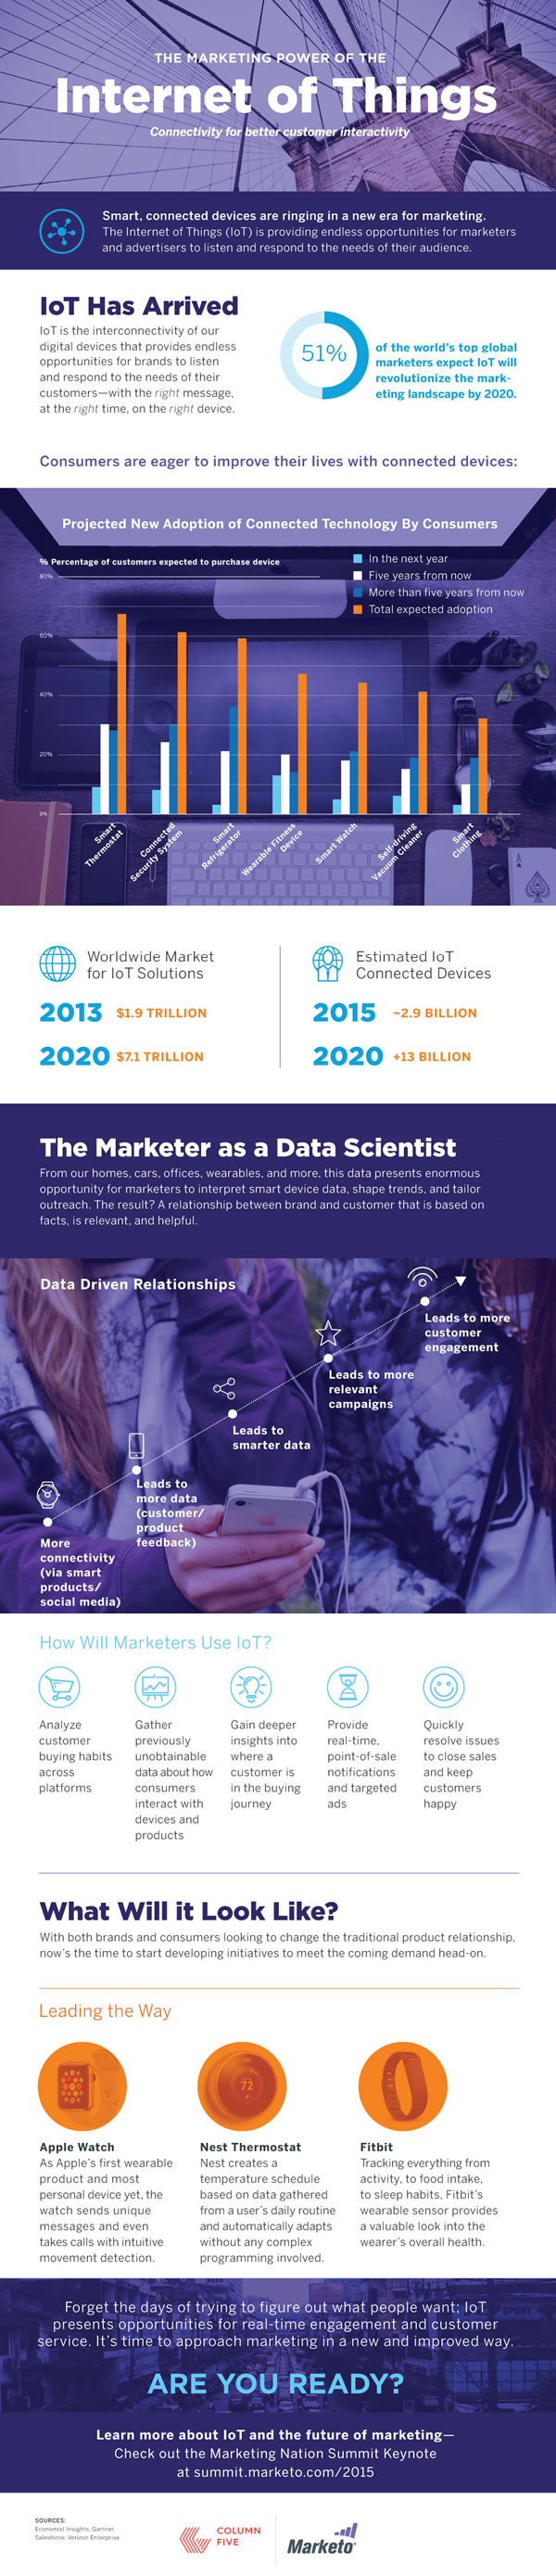 Marketing power of the Internet of Things - infographic by Marketo